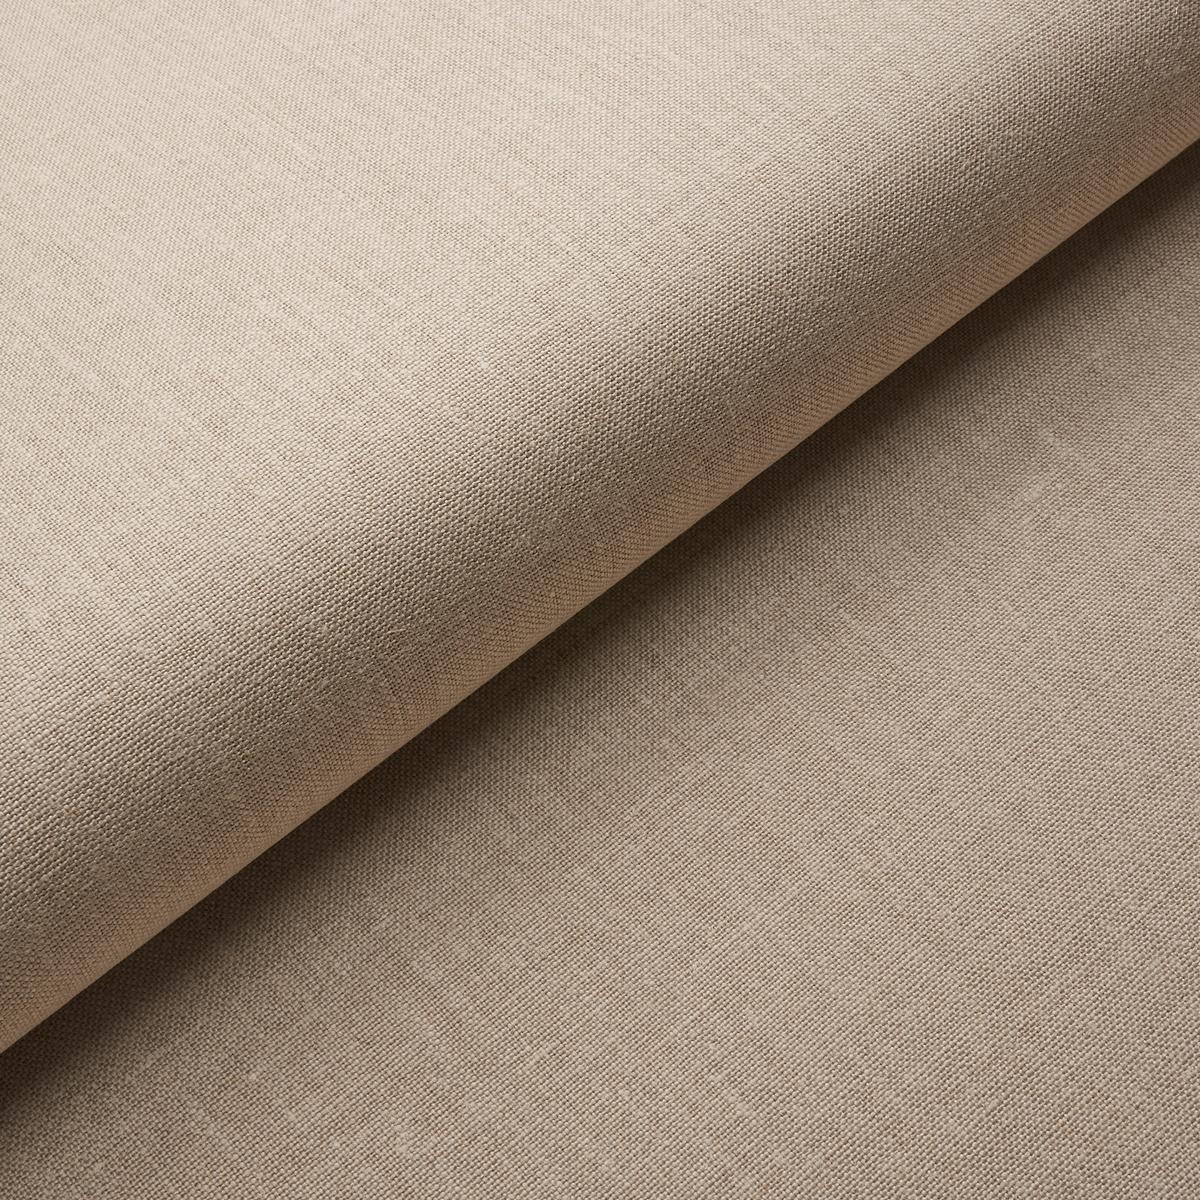 PERFORMANCE LINEN WALLCOVERING_FLAX